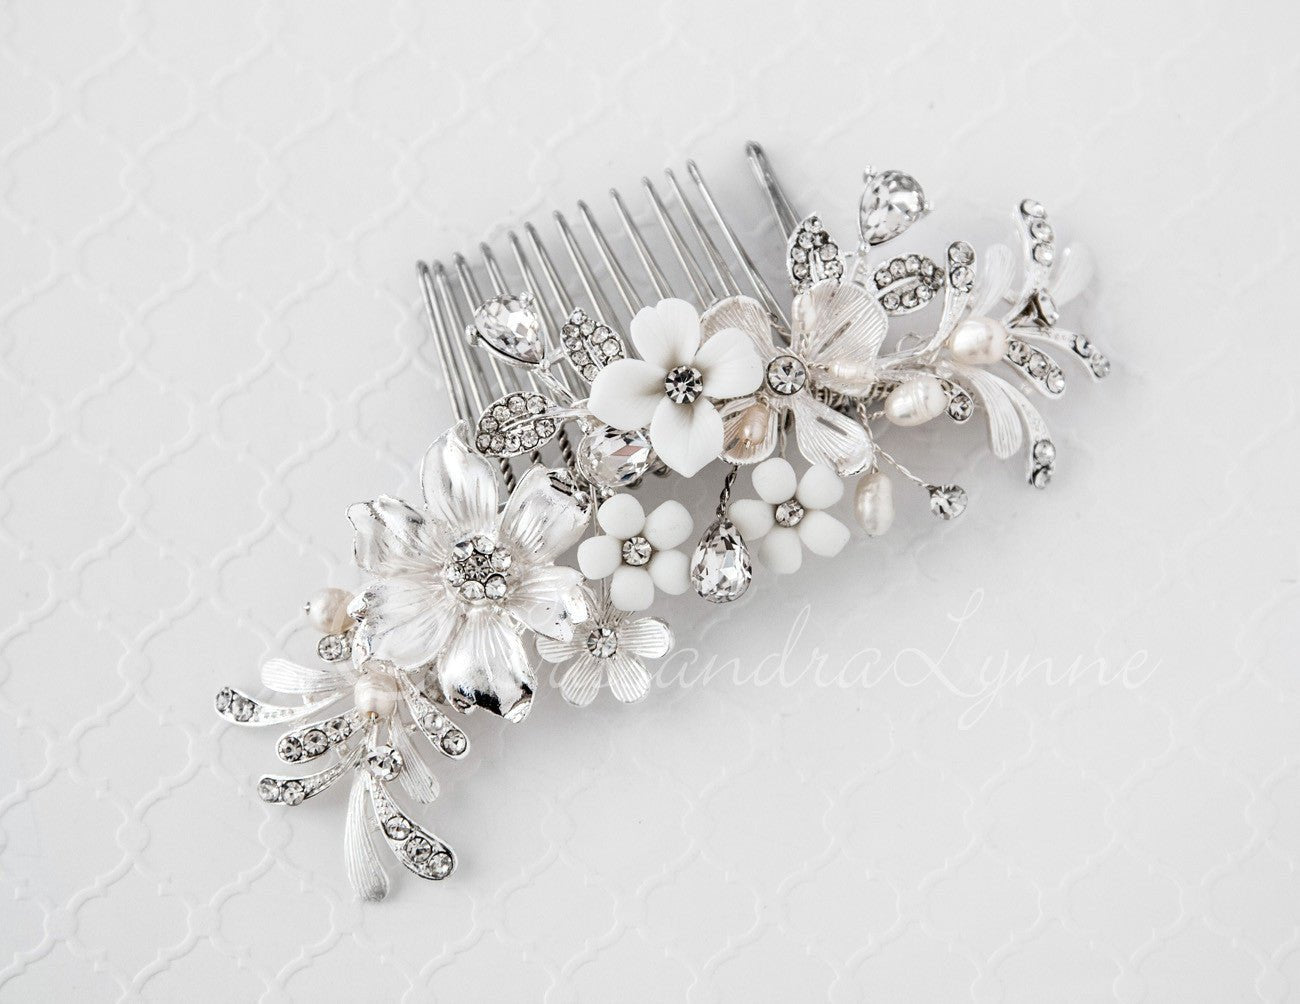 Bridal Hair Comb of Porcelain Flowers and Pearls - Cassandra Lynne